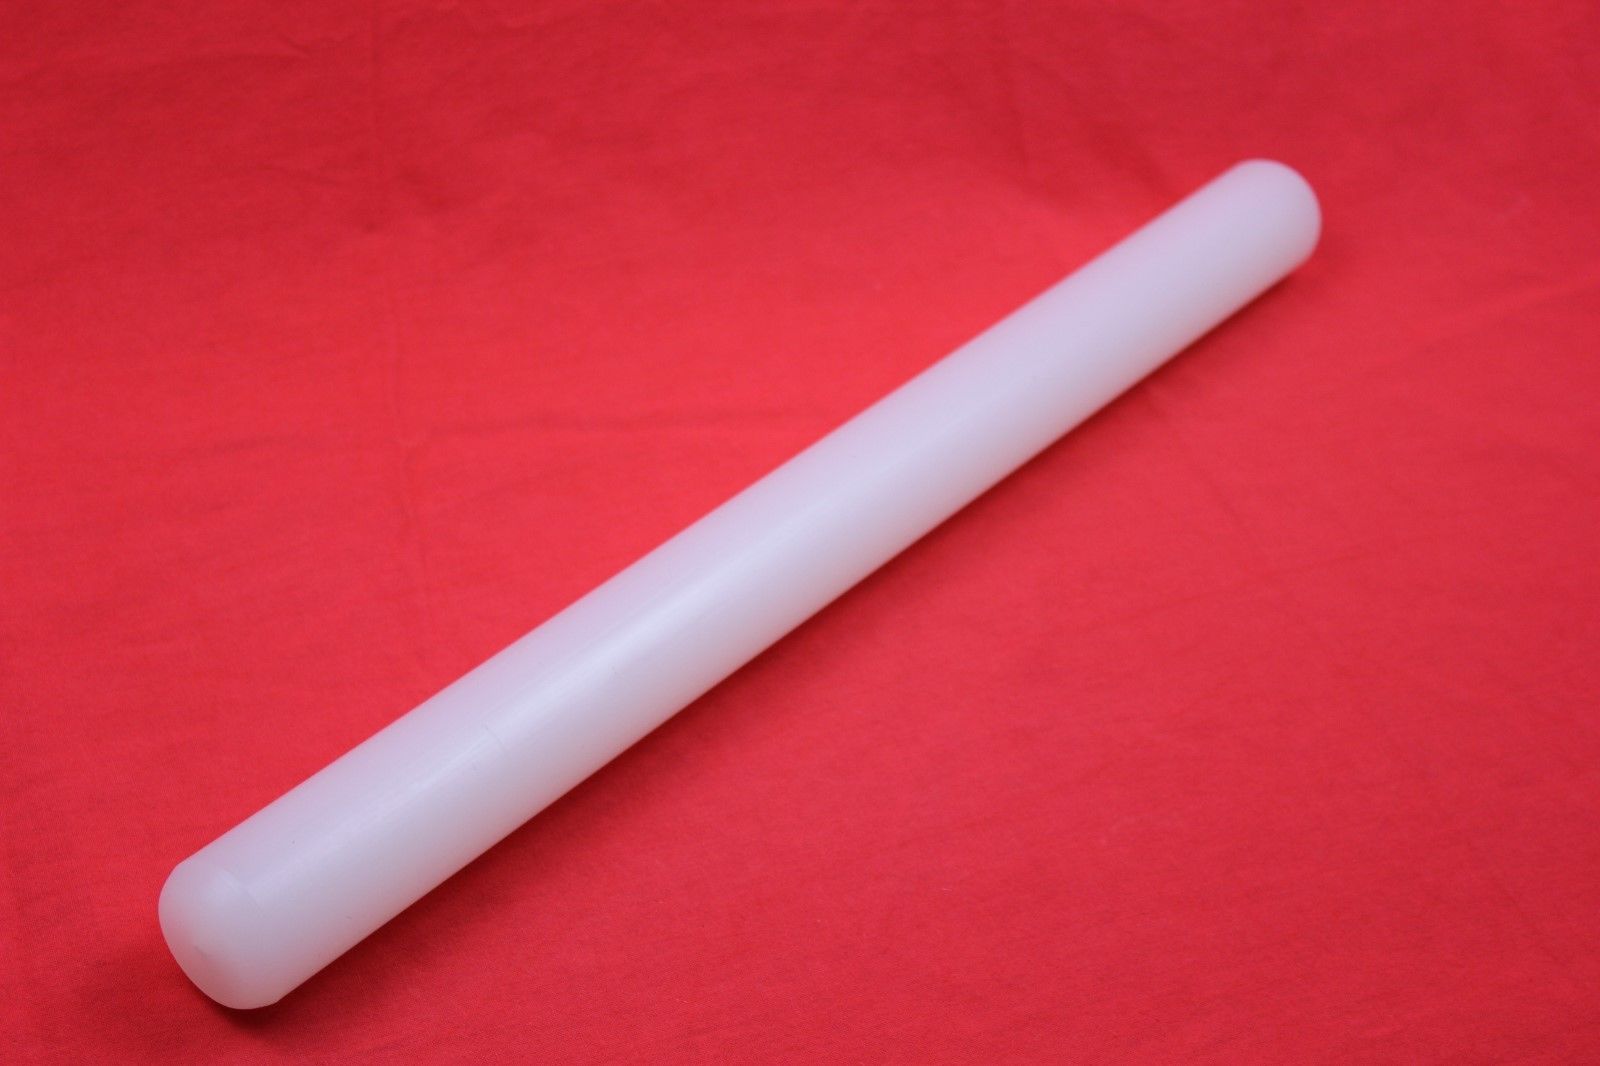 attachment-https://www.cupcakeaddicts.co.uk/wp-content/uploads/imported/7/Variation-of-Plastic-Rolling-Pin-8-Various-sizes-Cake-Pastry-UK-SELLER-Same-day-dispatch-323097813287-b3a2.jpg